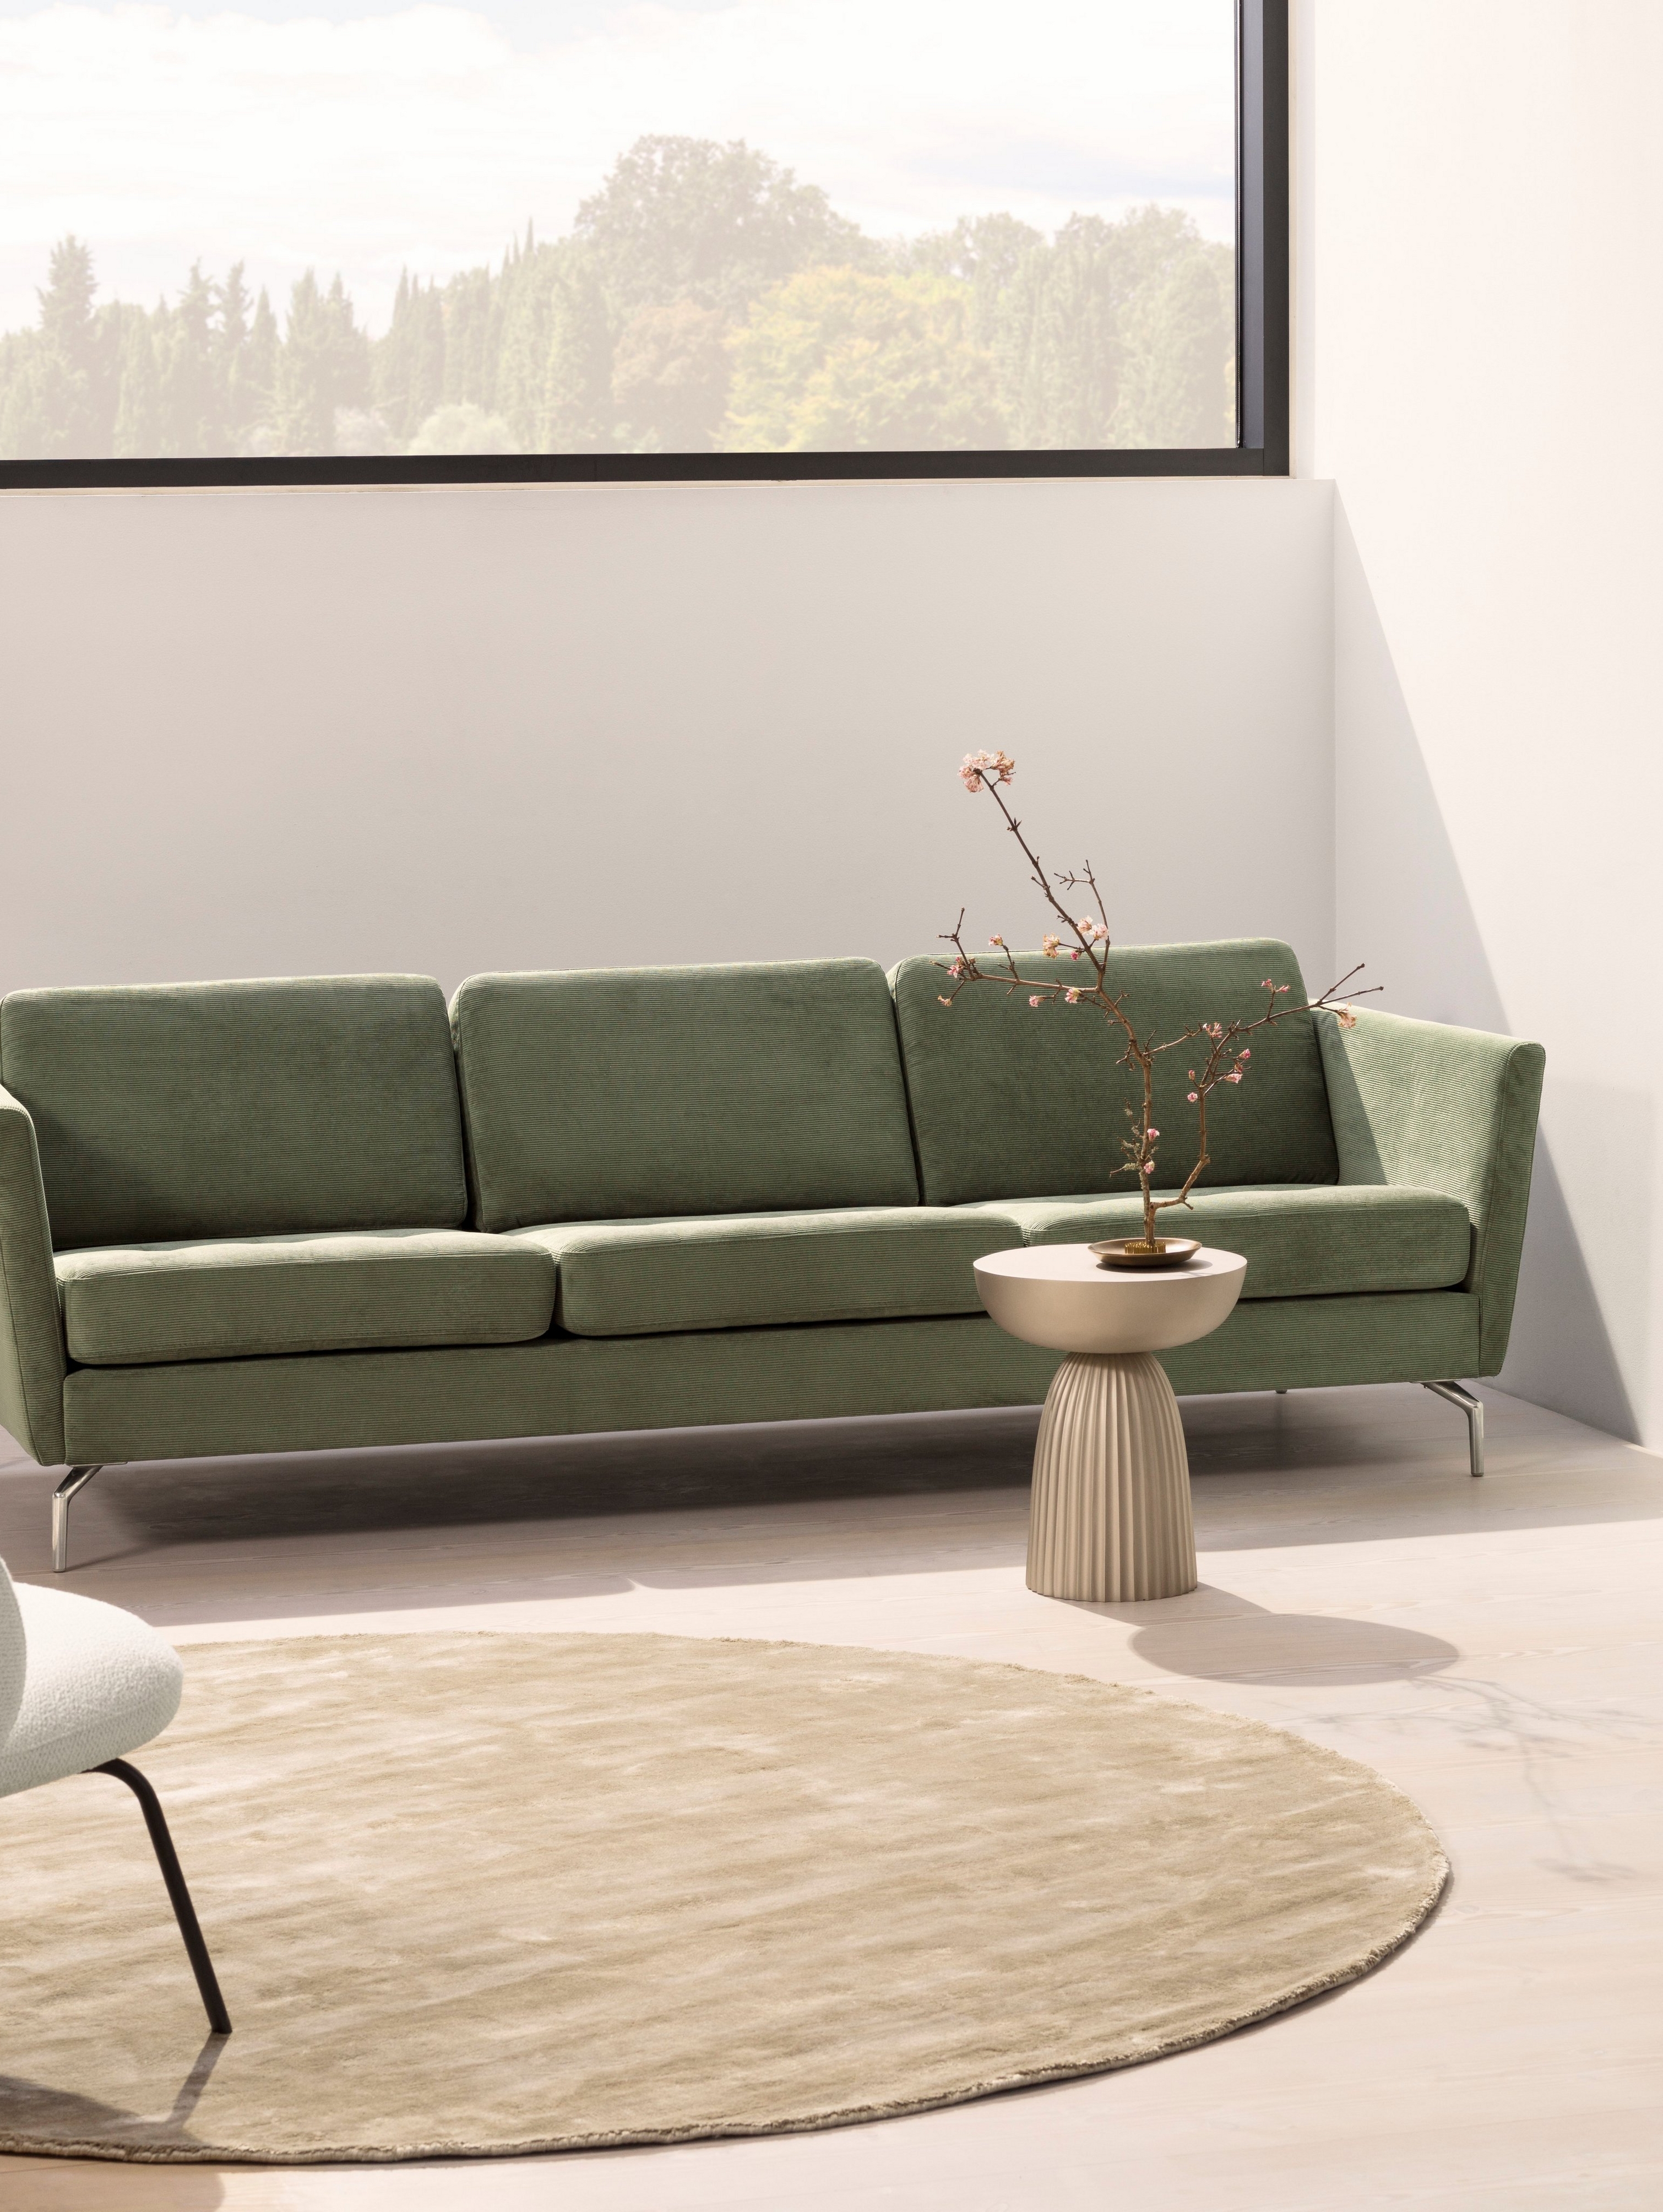 The Osaka sofa with its tufted seats in a living room.